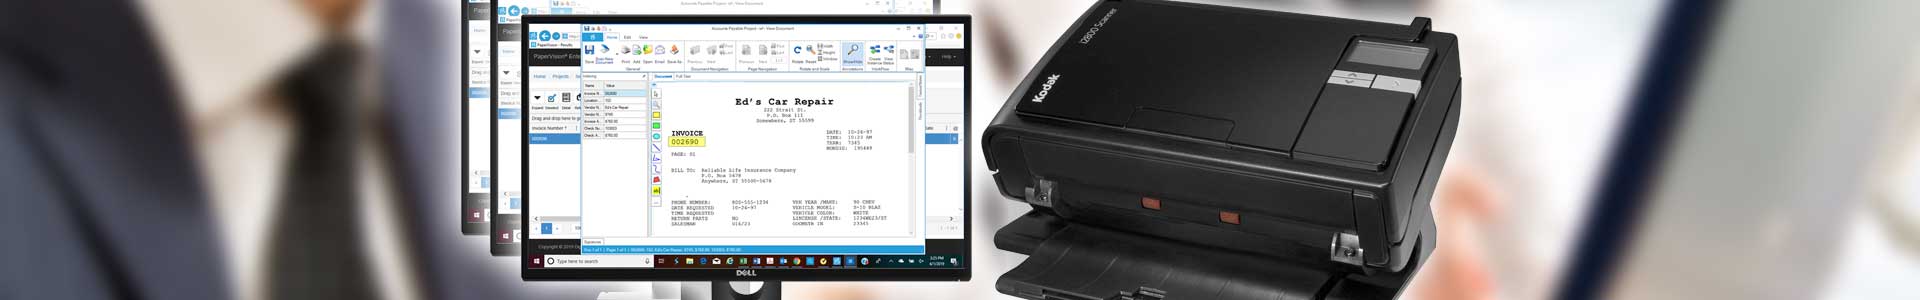 Document Management Systems, Scanners and Software